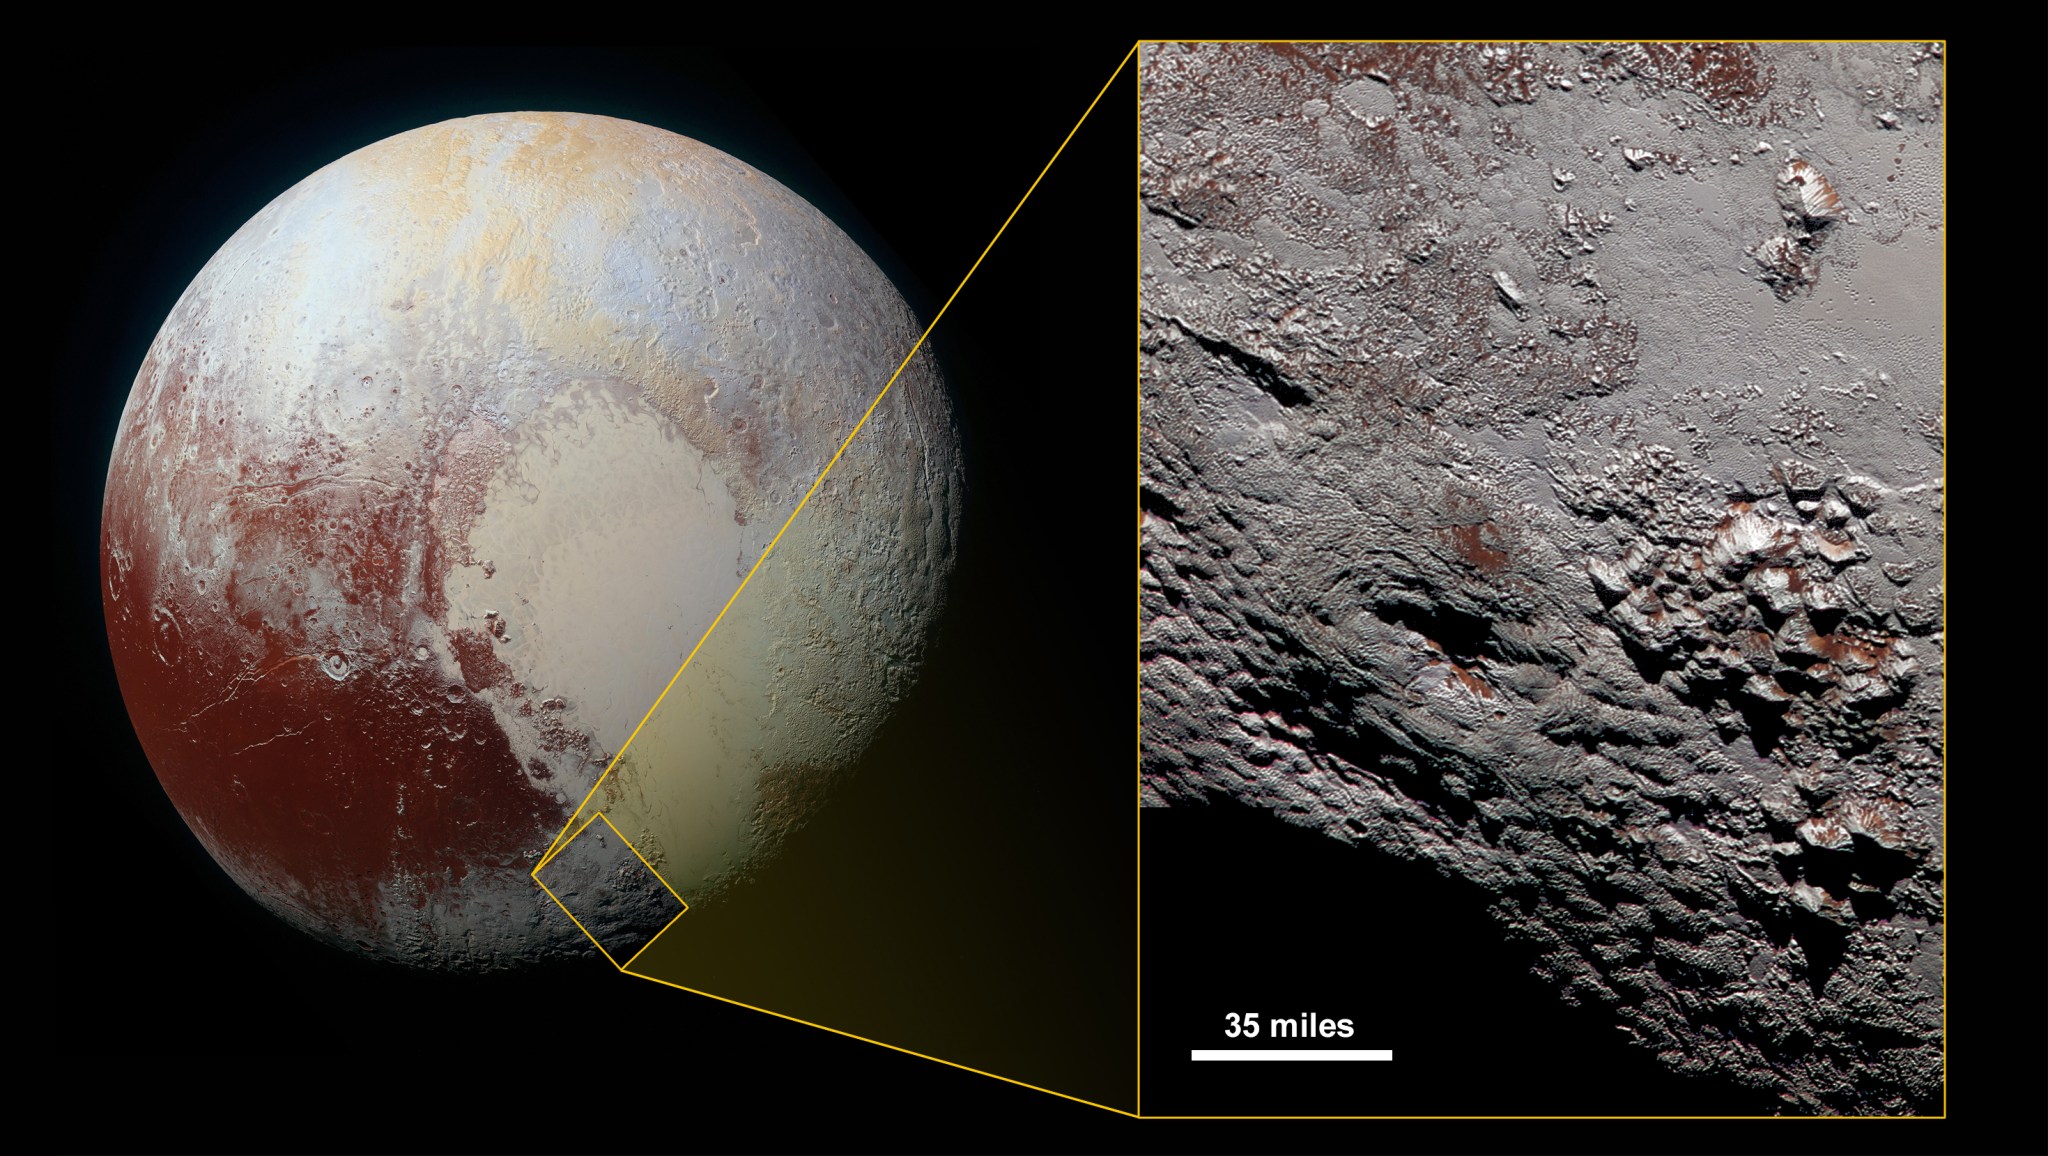 Pluto expanded